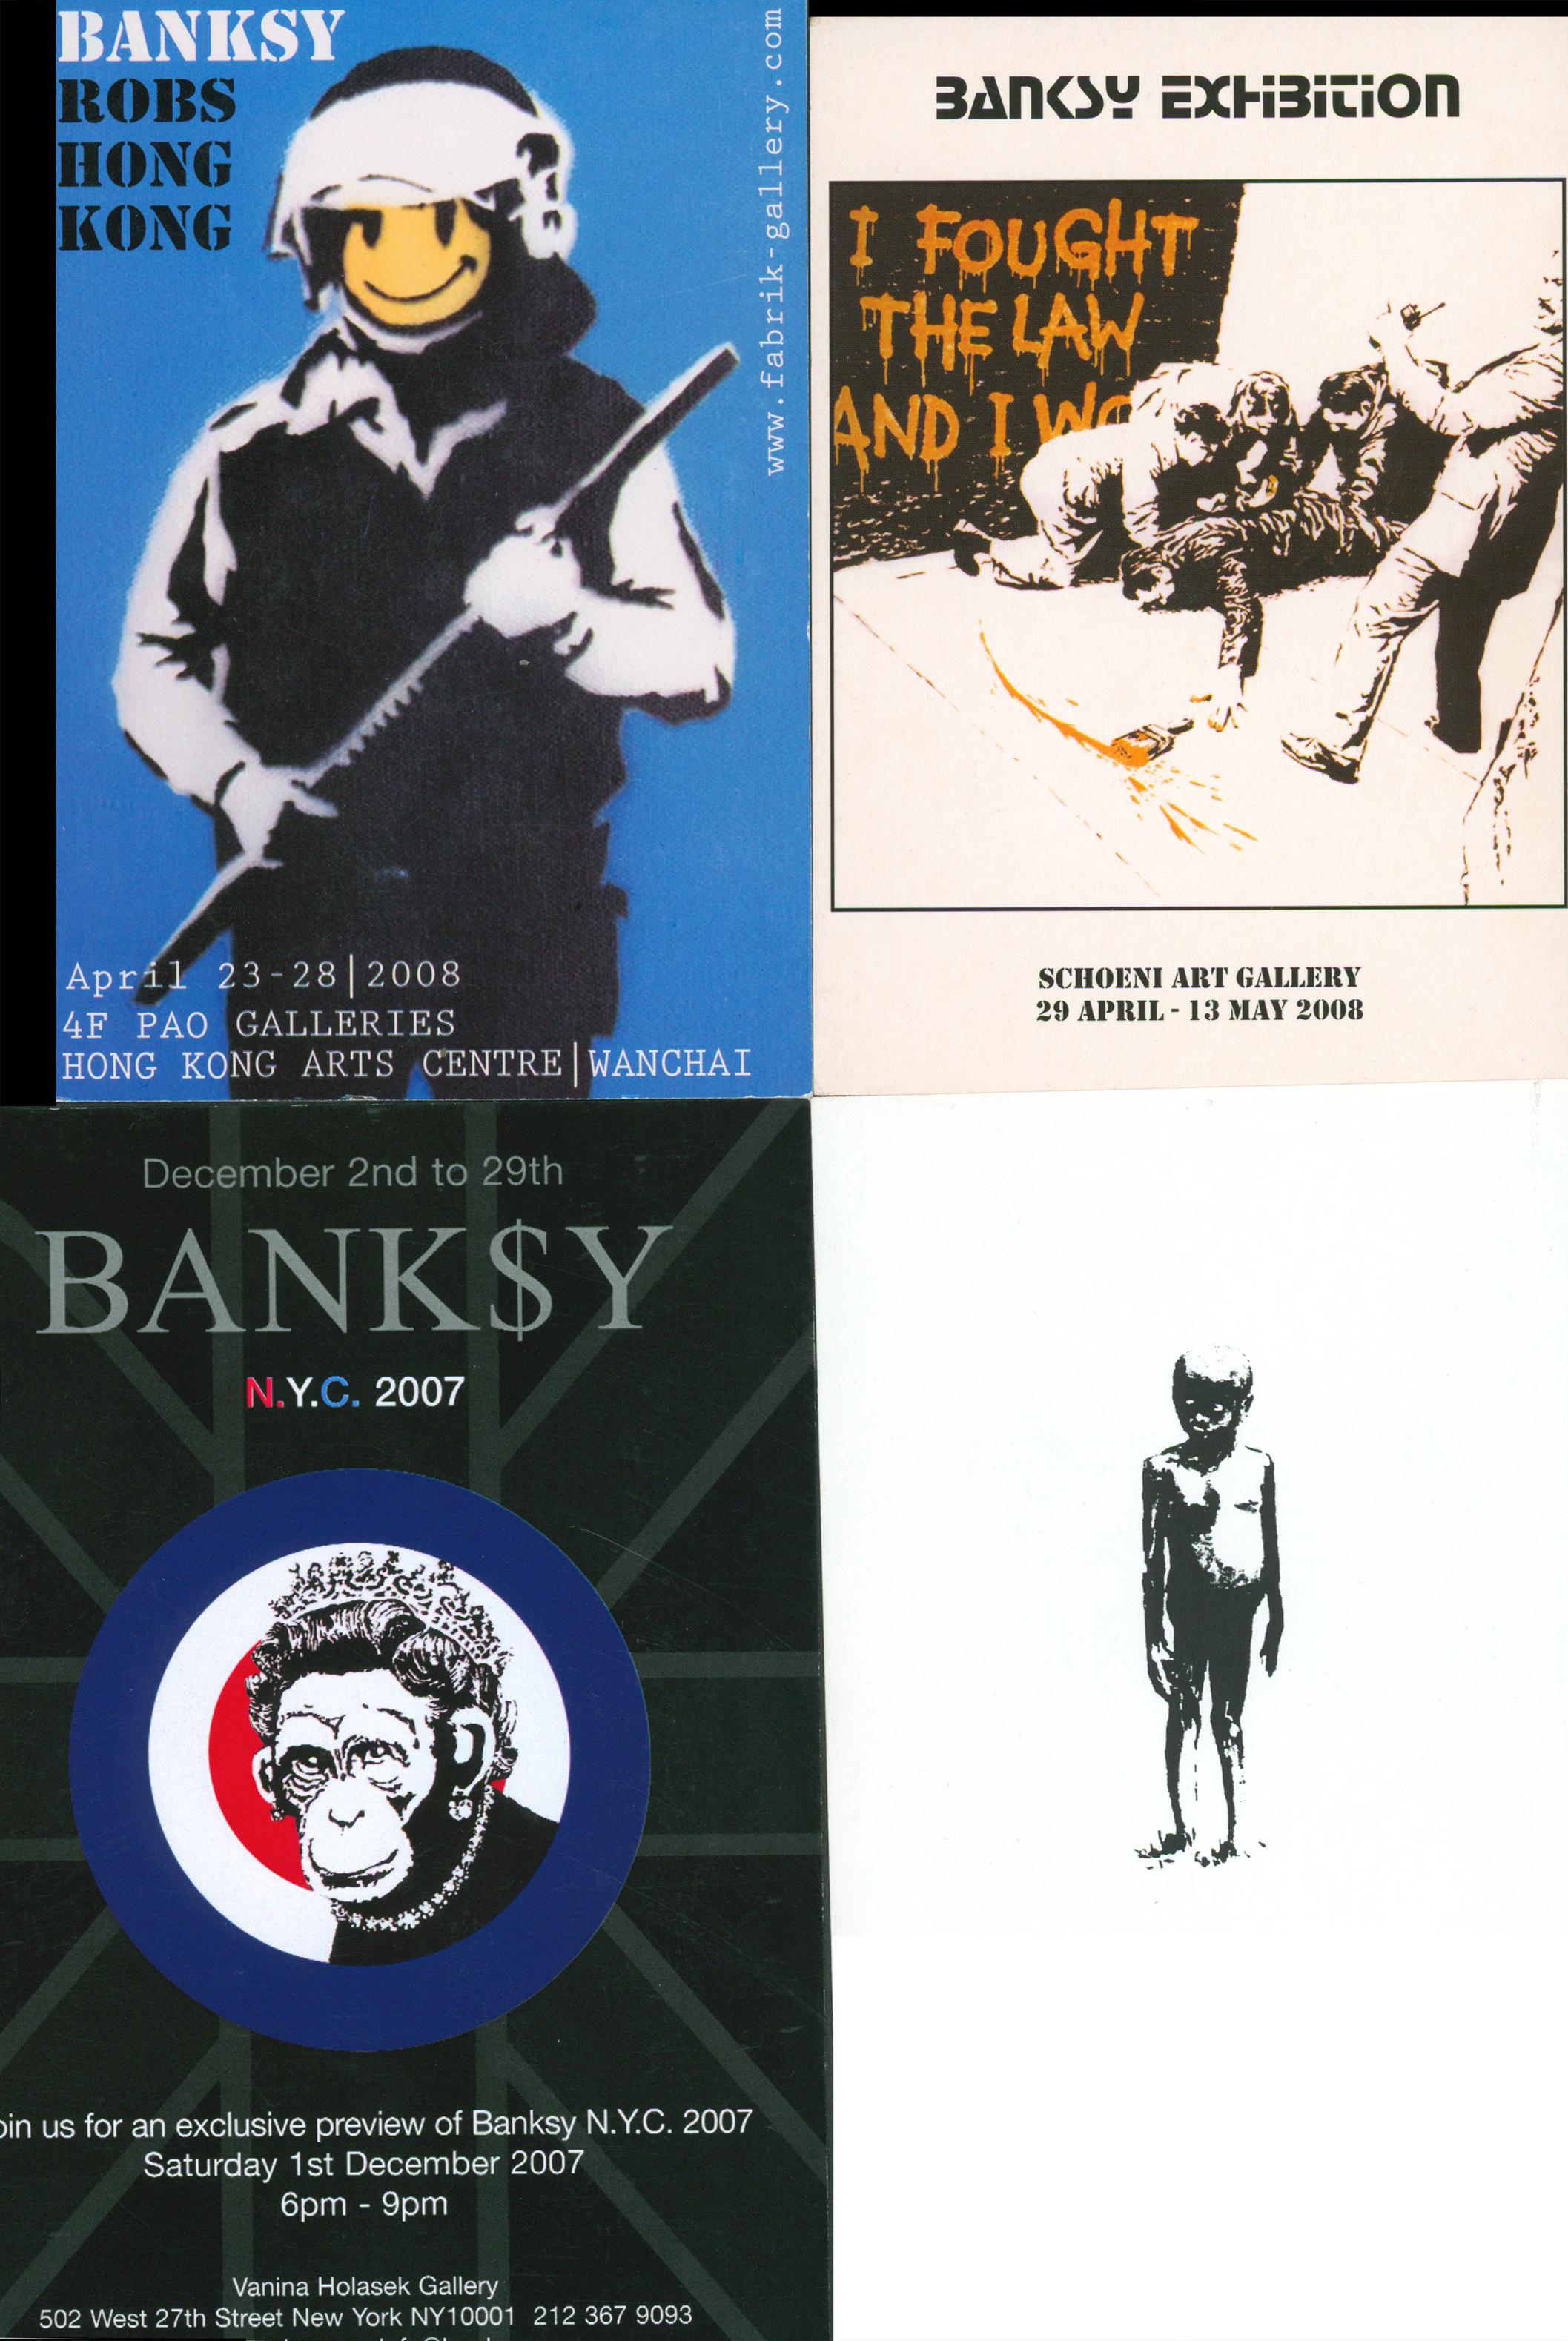 A rare set of four rare vintage Banksy announcement cards published between 2006-2008 to advertise the following Banksy exhibitions:

Schoeni Art Gallery April 29 - May 13, 2008 Hong Kong.

Banksy NYC December 1st, 2007: Vanina Holasek Gallery New